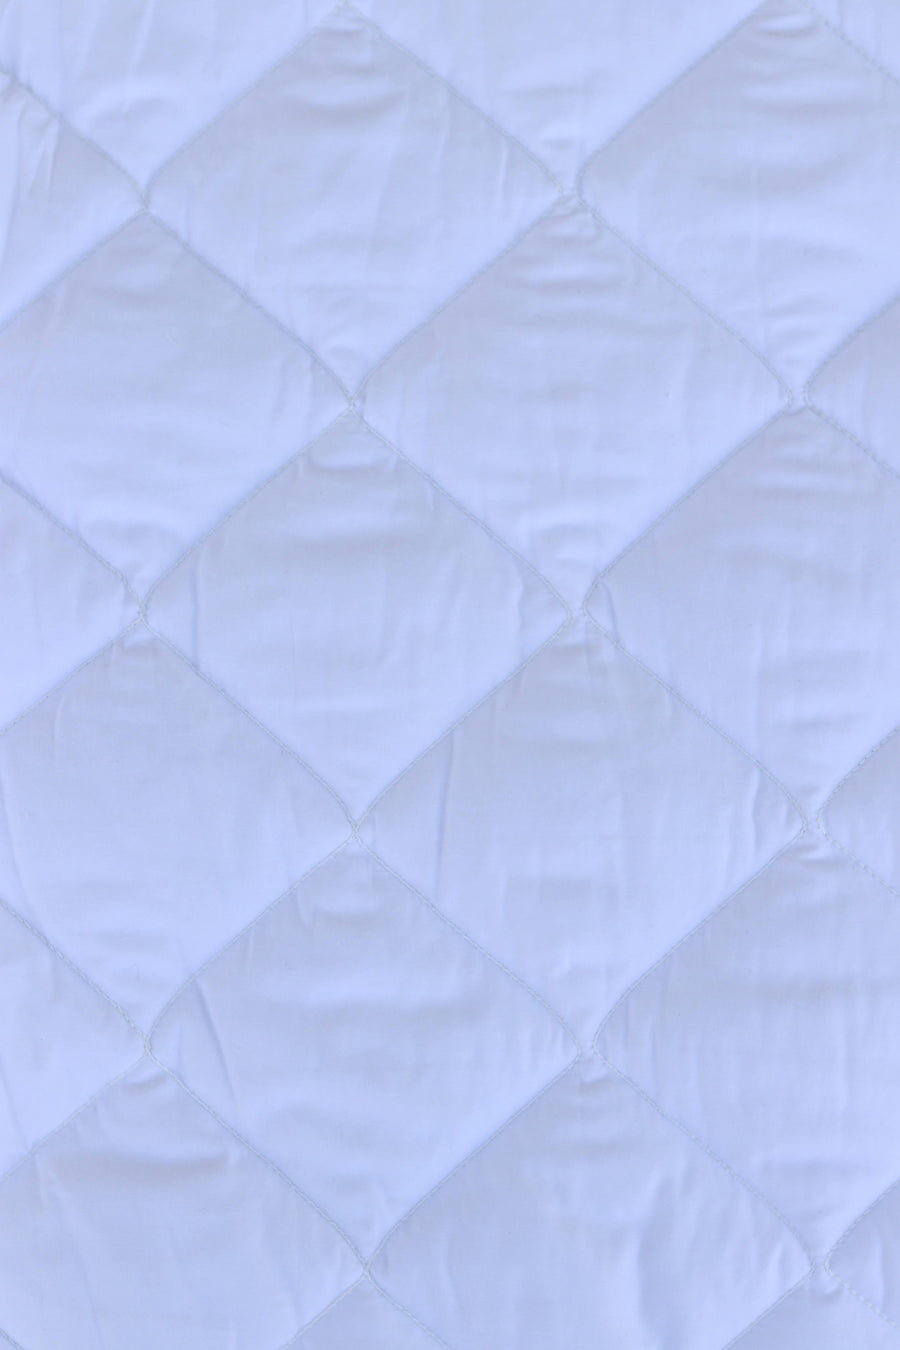 Cotton quilted mattress pads for adjustable beds